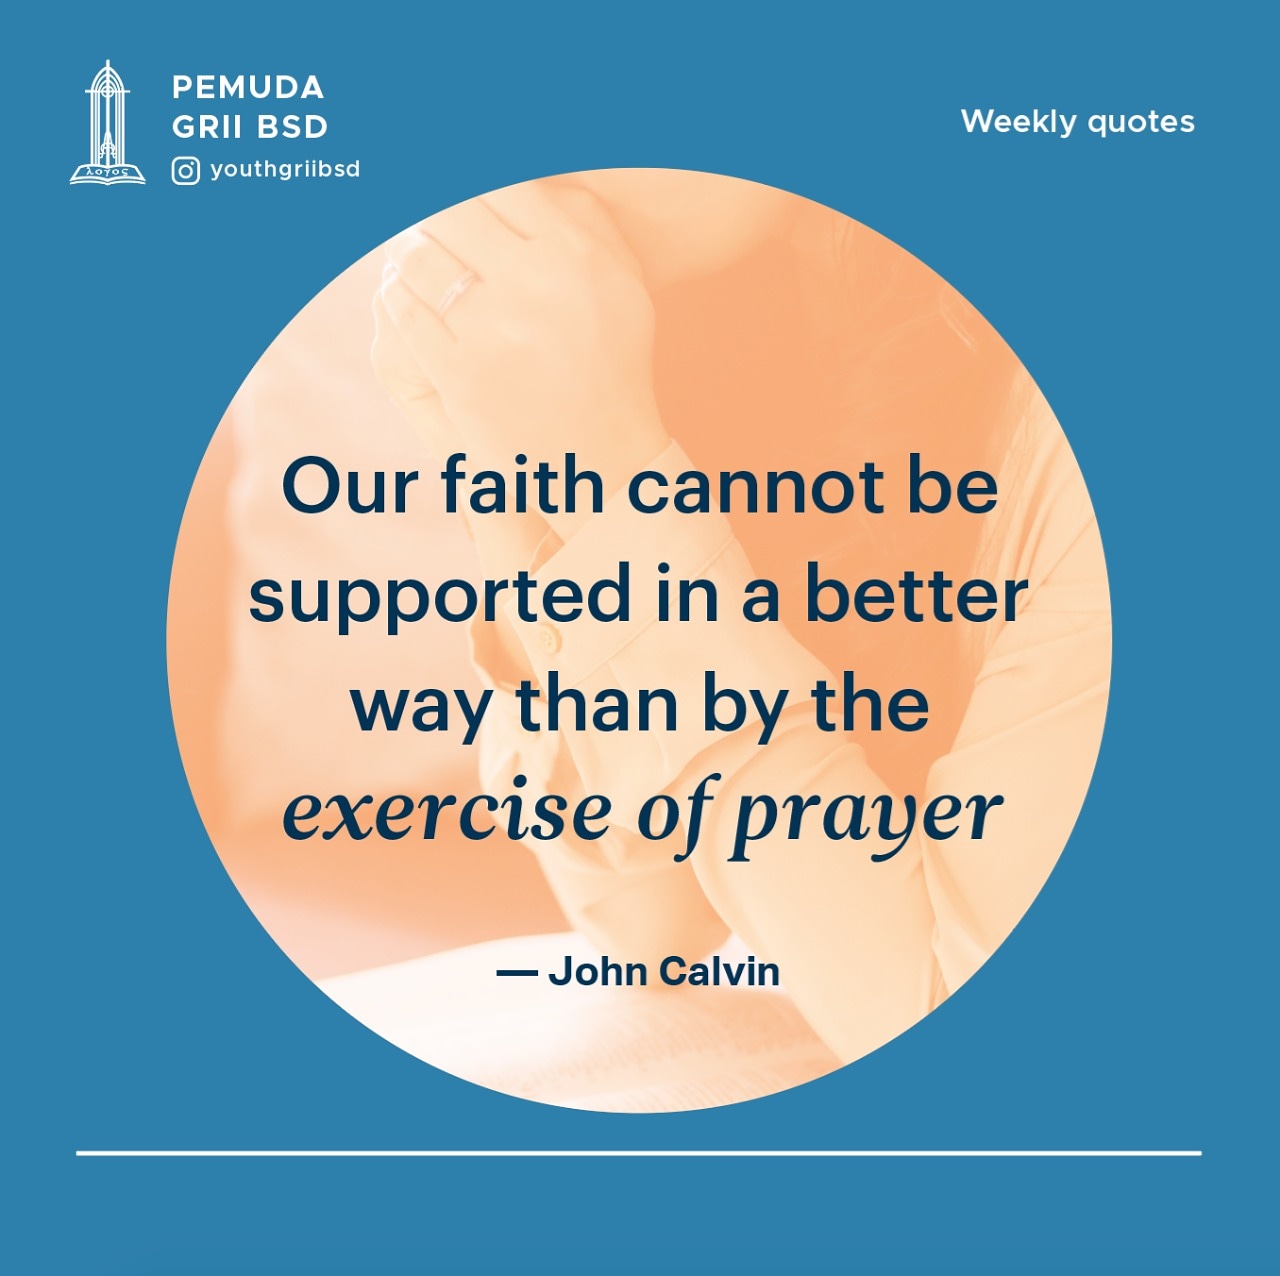 Our faith cannot be supported in a better way than by the exercise of prayer.